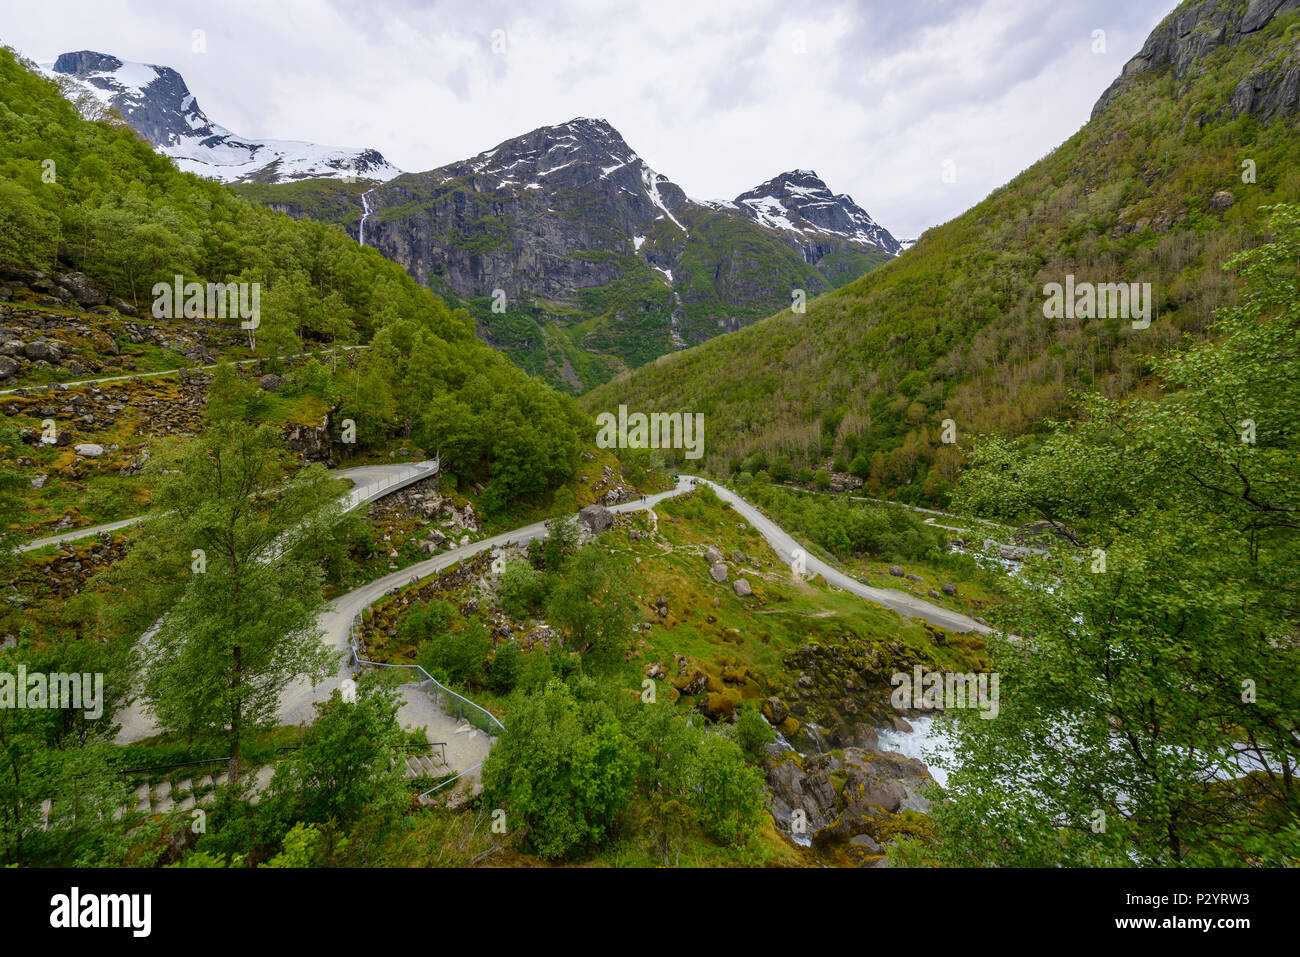 Briksdal Glacier in national park- a view from the entrance to the park Stock Photo